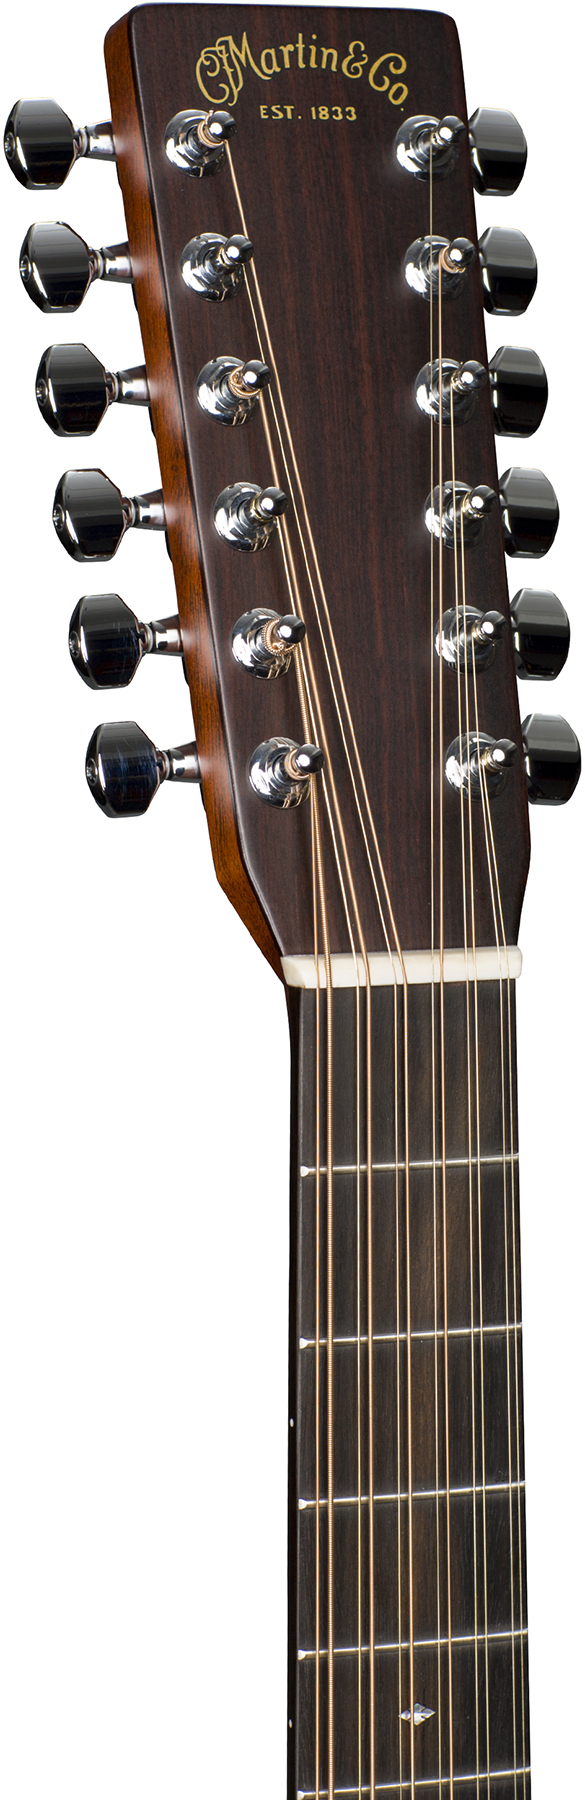 Martin Hd12-28 Standard Re-imagined Dreadnought 12c Epicea Palissandre Eb - Natural Aging Toner - Westerngitarre & electro - Variation 2